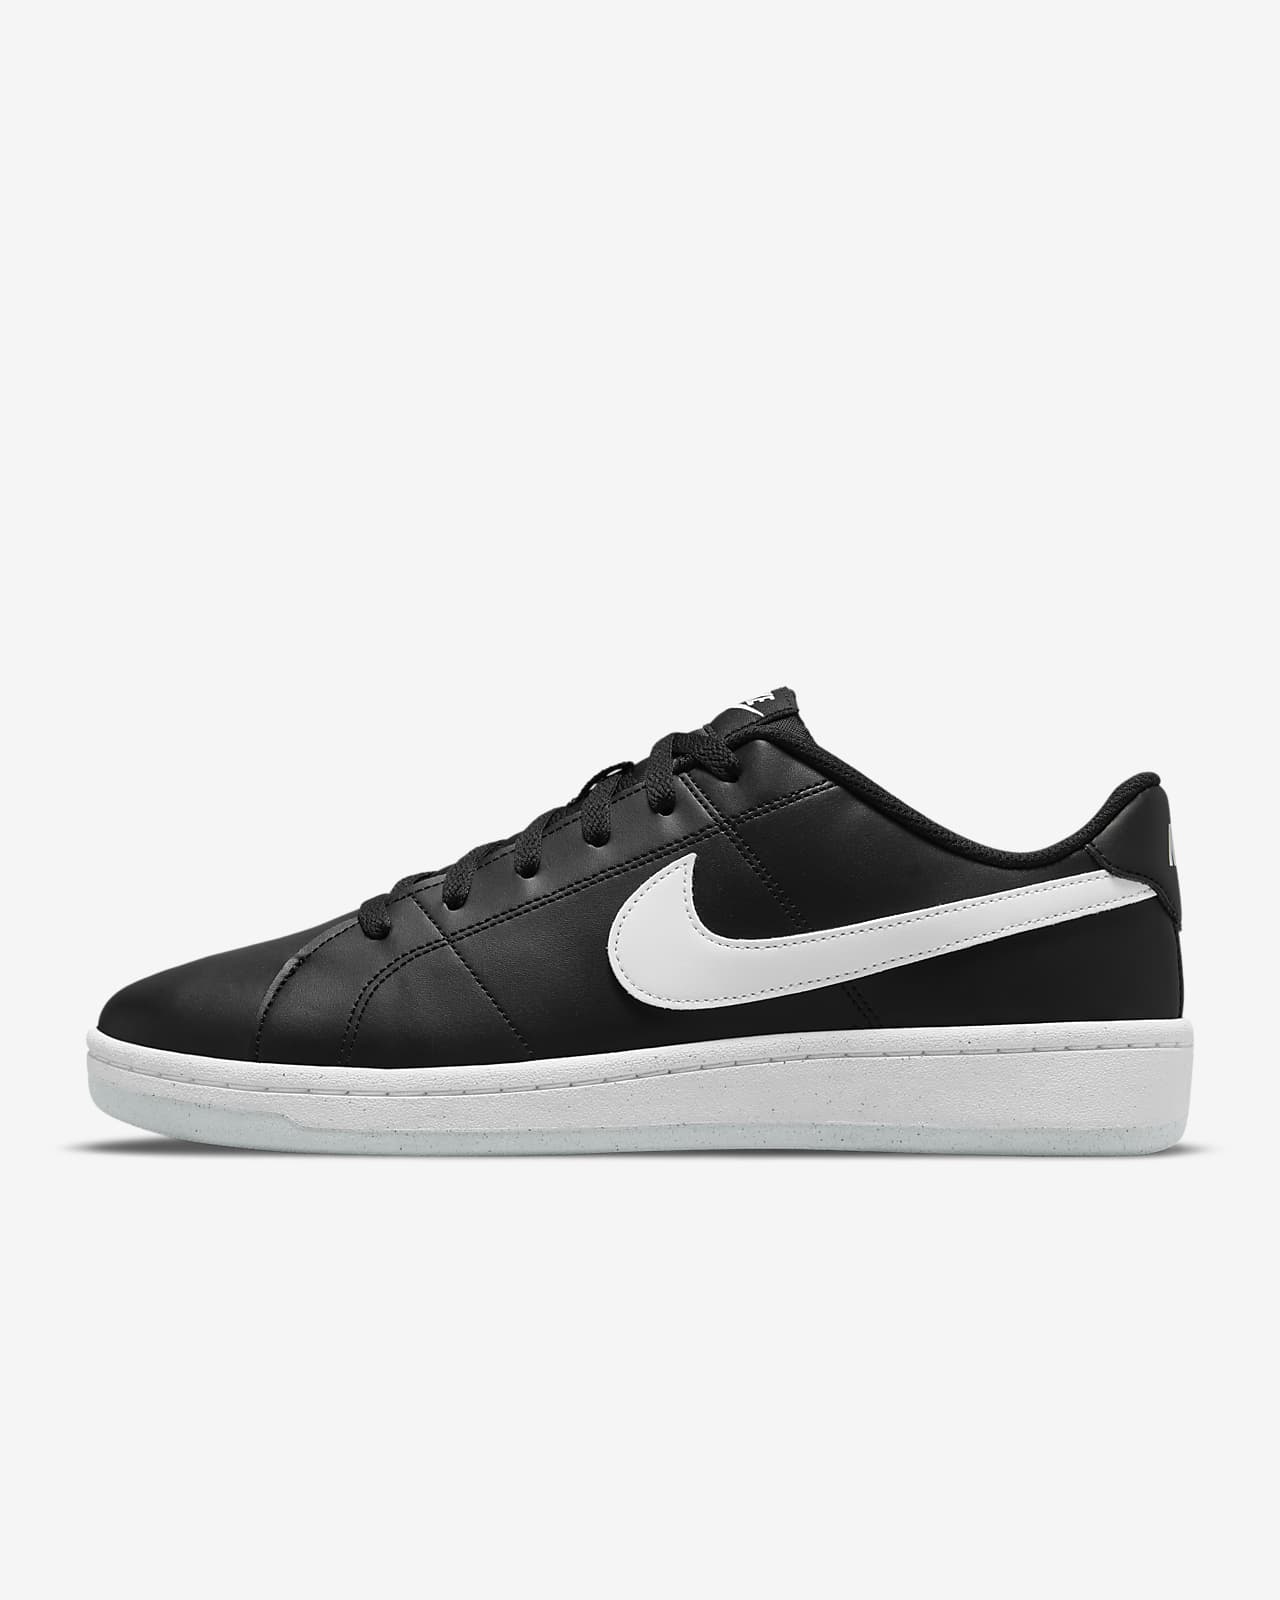 DEPORTIVO NIKE COURT ROYALE 2 BETTER ESSENTIAL NEGRO / BLANCO